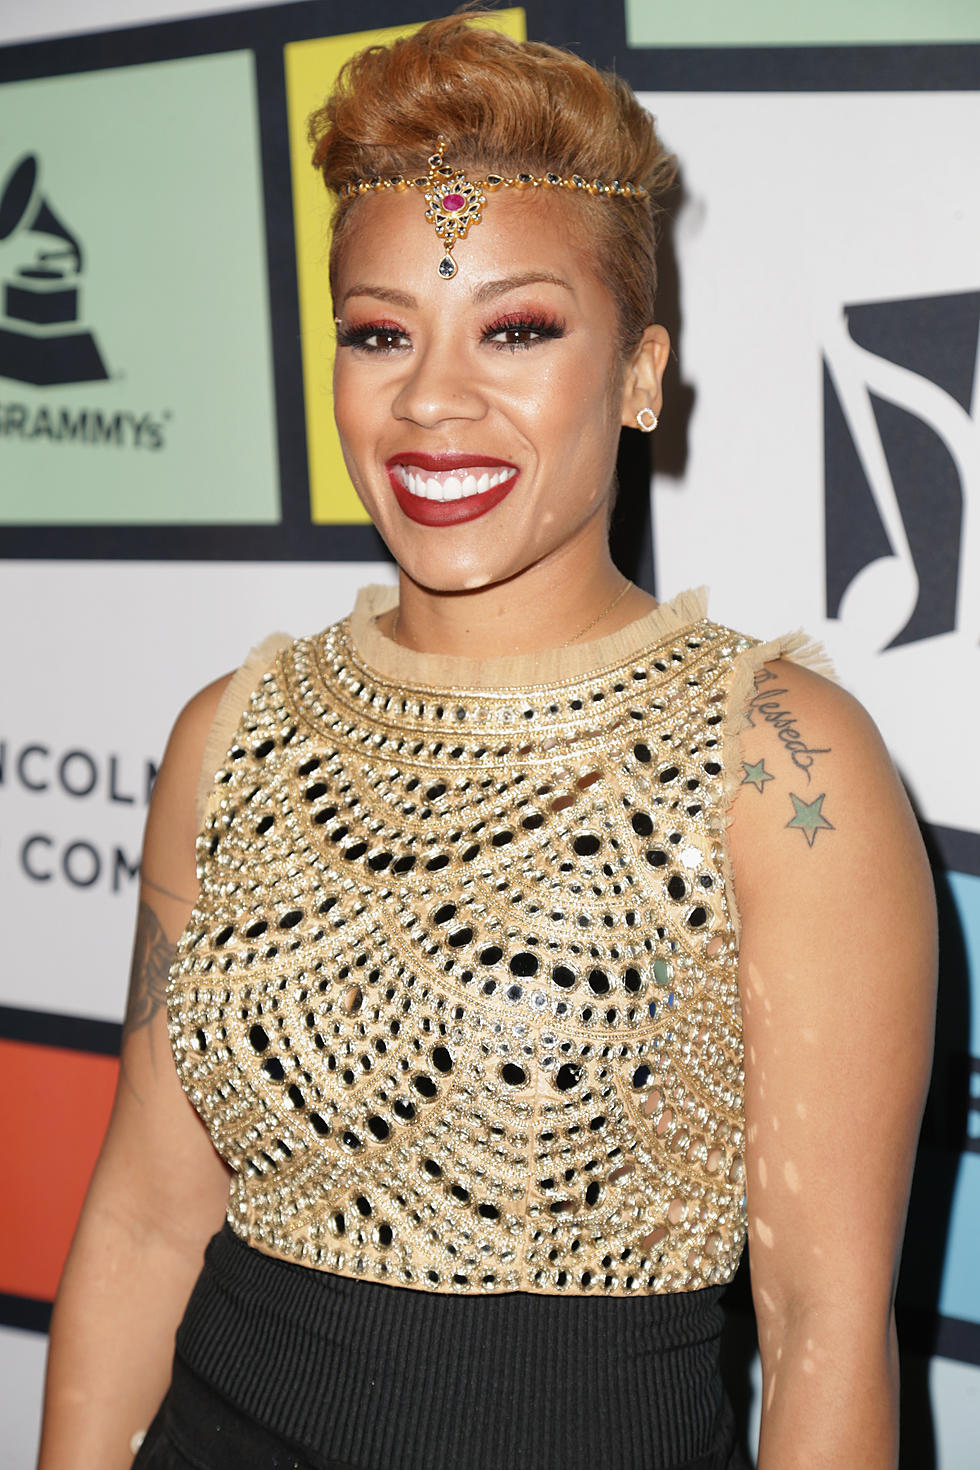 Keyshia Cole Talks Love And Hip Hop And Past Relationships [VIDEO]